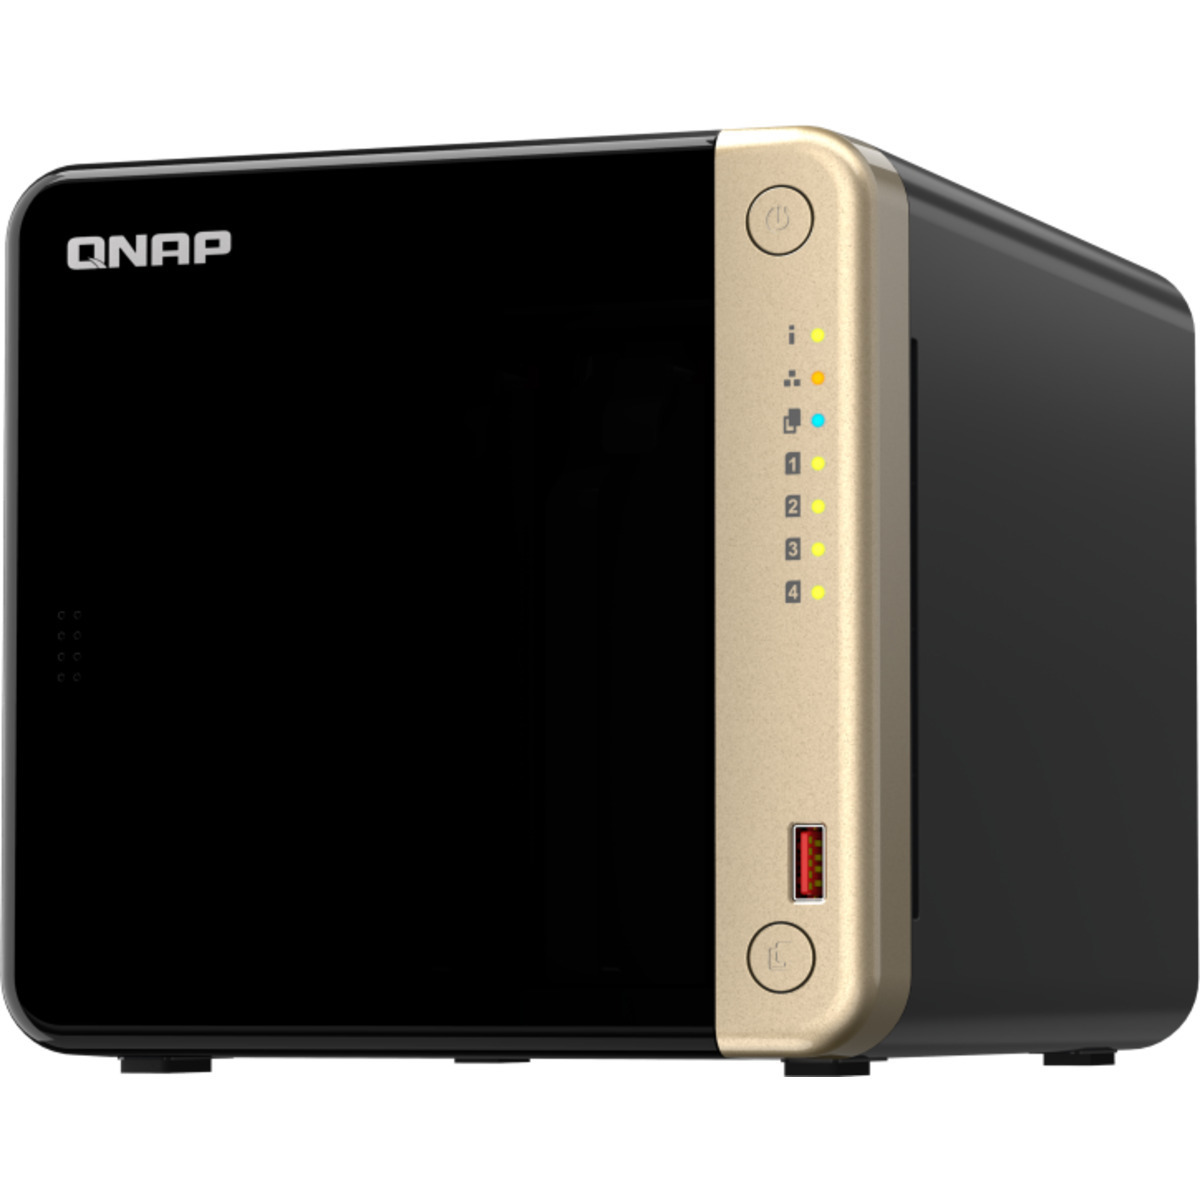 QNAP TS-464 40tb 4-Bay Desktop Multimedia / Power User / Business NAS - Network Attached Storage Device 4x10tb Seagate IronWolf Pro ST10000NT001 3.5 7200rpm SATA 6Gb/s HDD NAS Class Drives Installed - Burn-In Tested - ON SALE TS-464